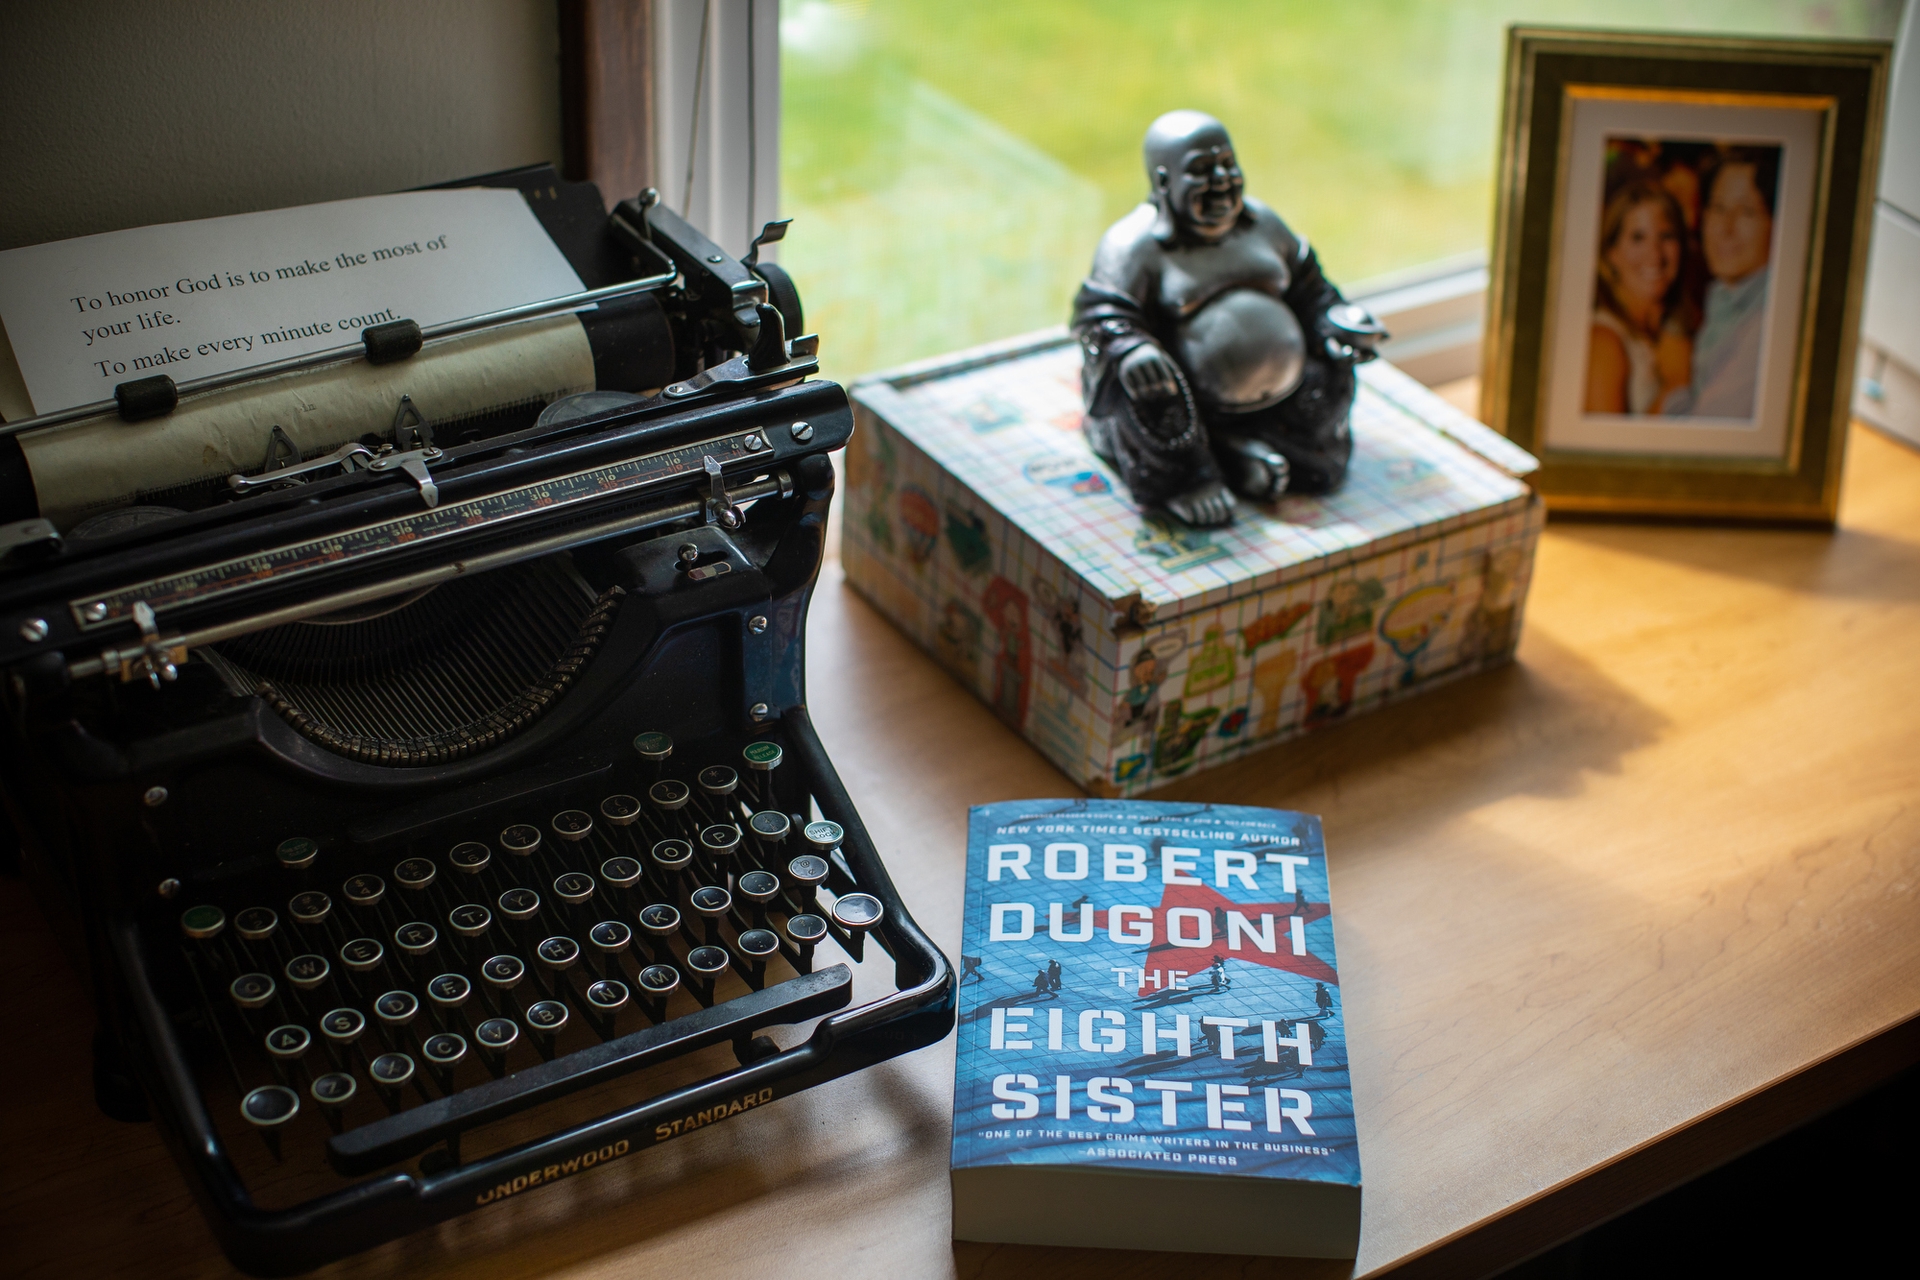 Author Robert Dugoni's workspace within his home office, a refurbished typerwriter sits near a window. To it's left, a small box topped with a Buddha figurine, a copy of his book "The Eighth Sister" and a framed photograph. 